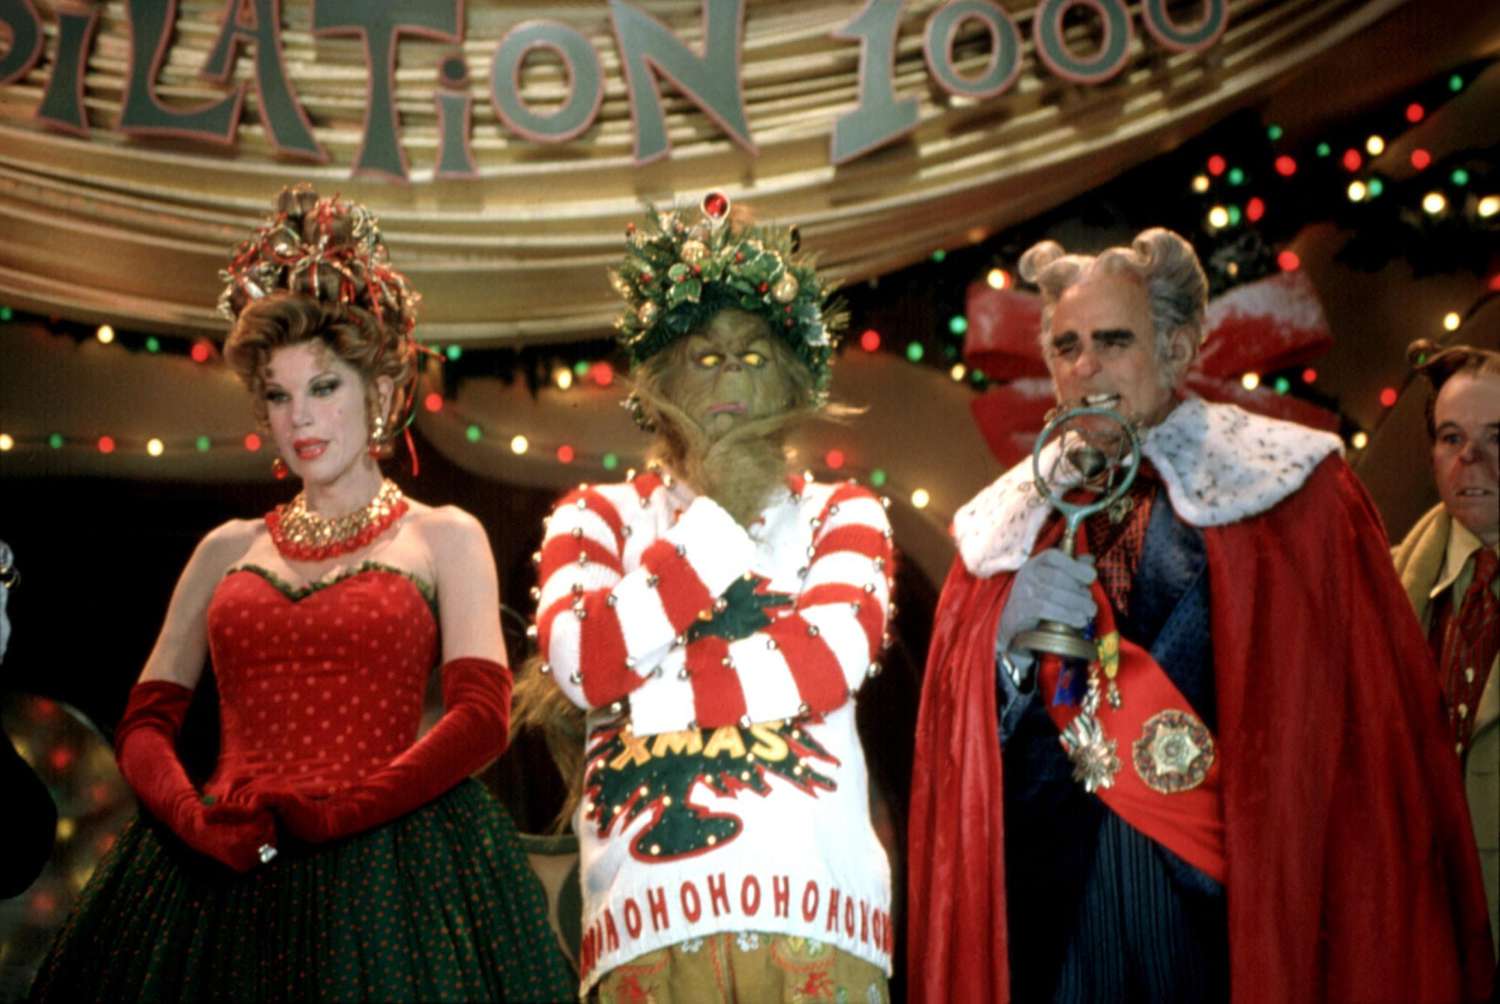 MOST FESTIVE WARDROBE: Martha May Whovier, How the Grinch Stole Christmas (2000)